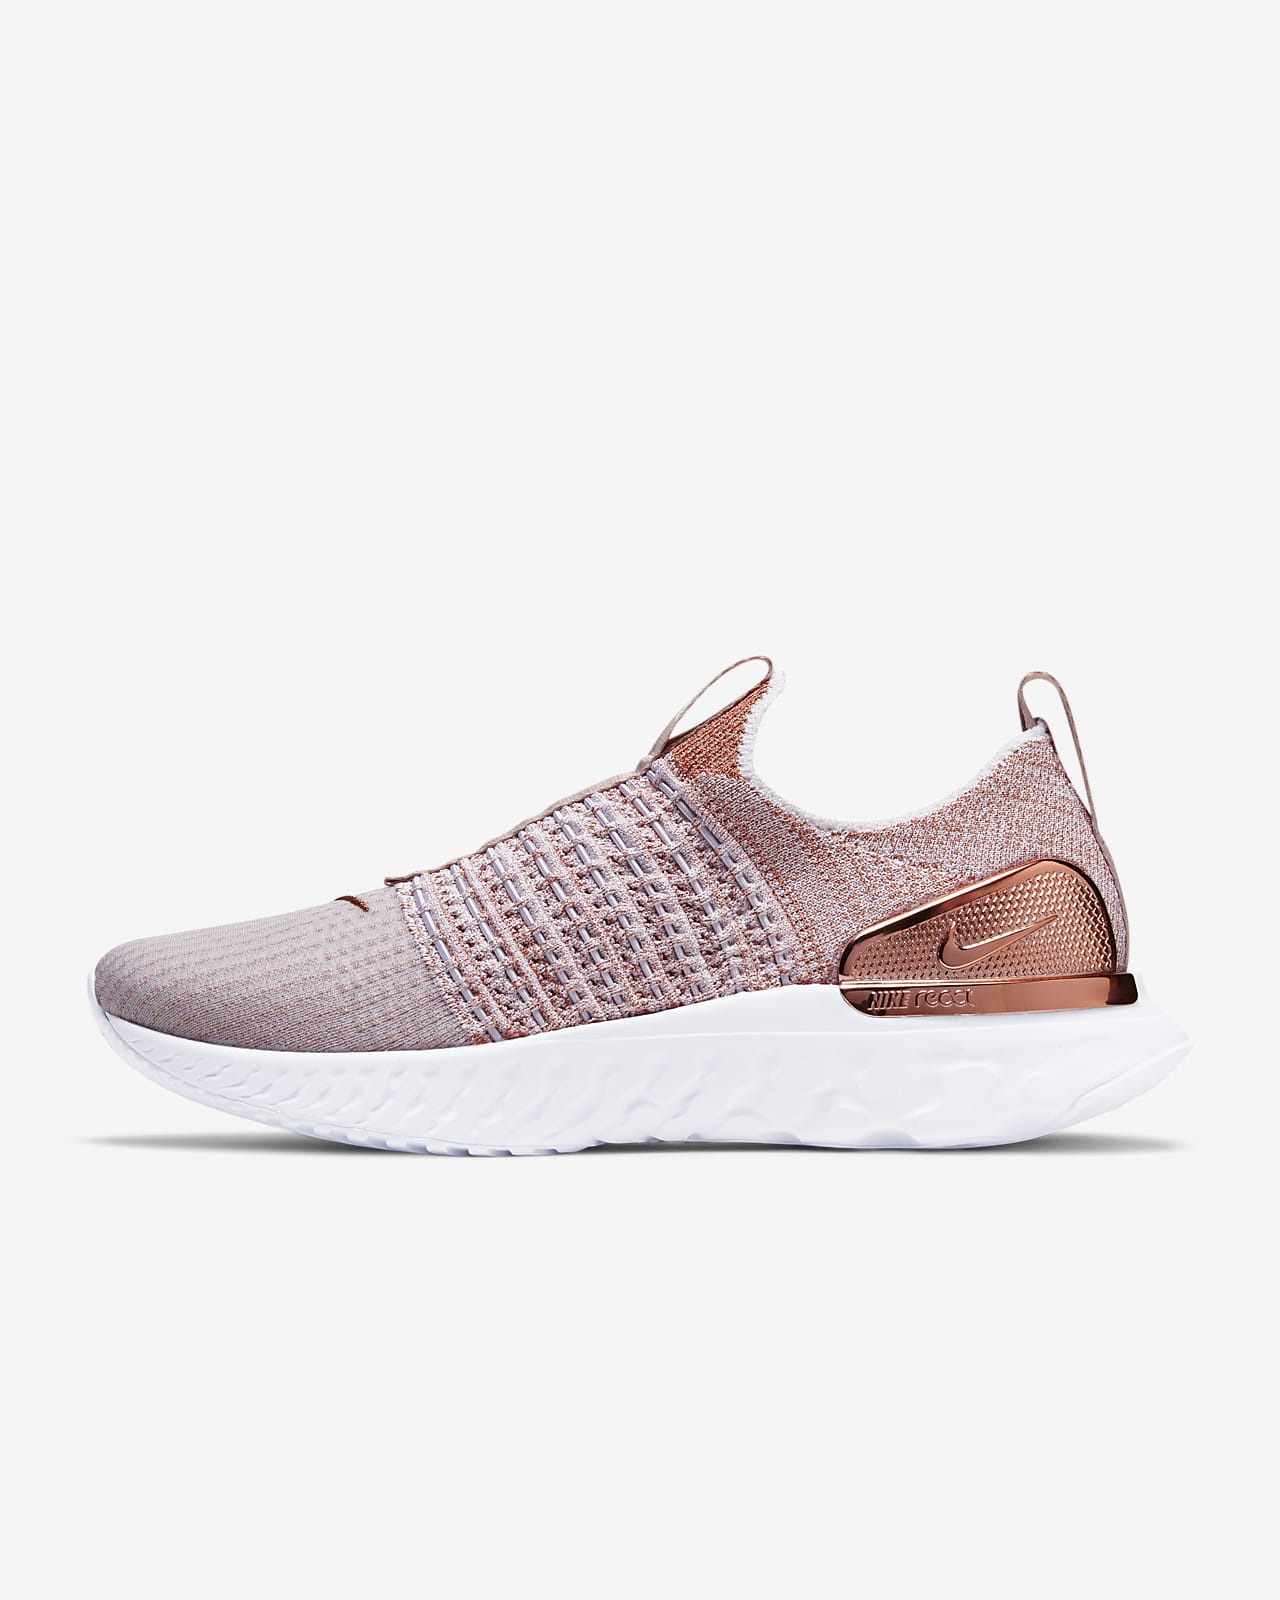 nike womens running shoes rose gold